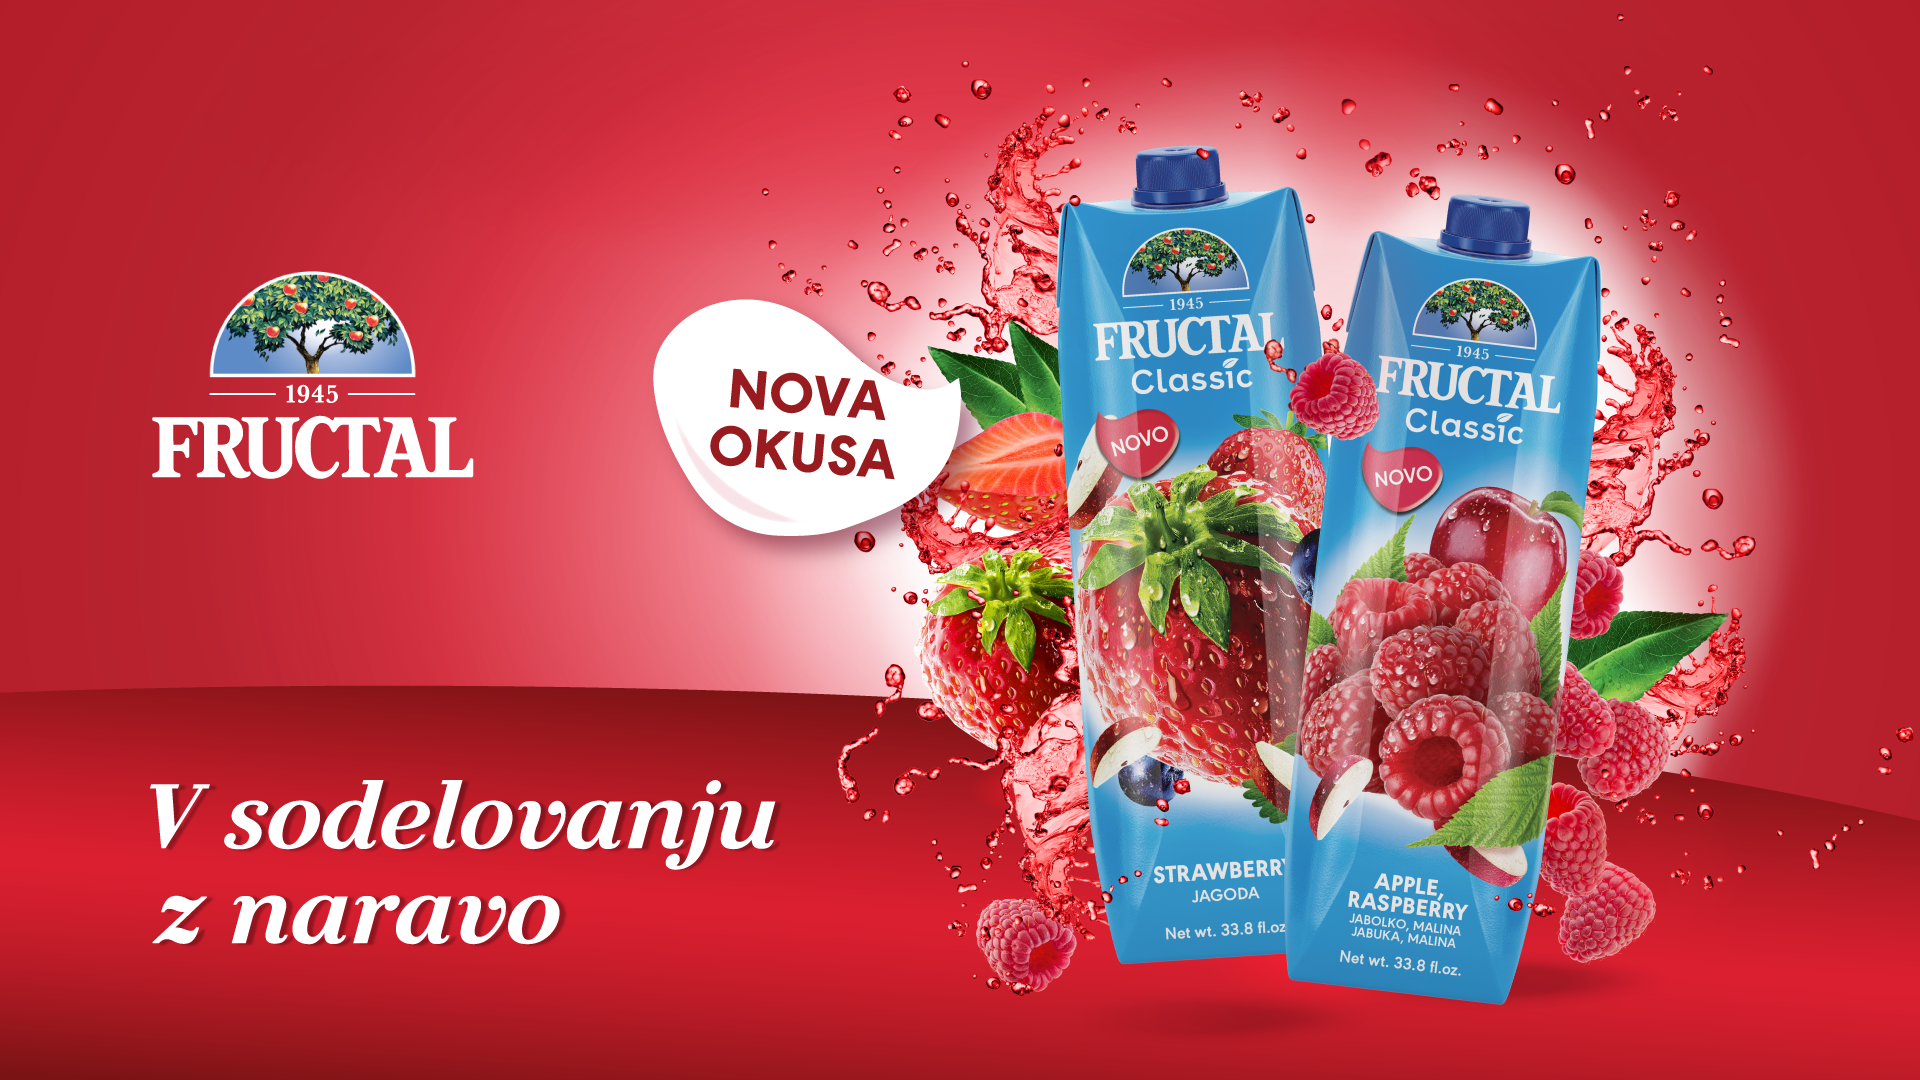 Fructal-Classic-banner-623addd062d35.png